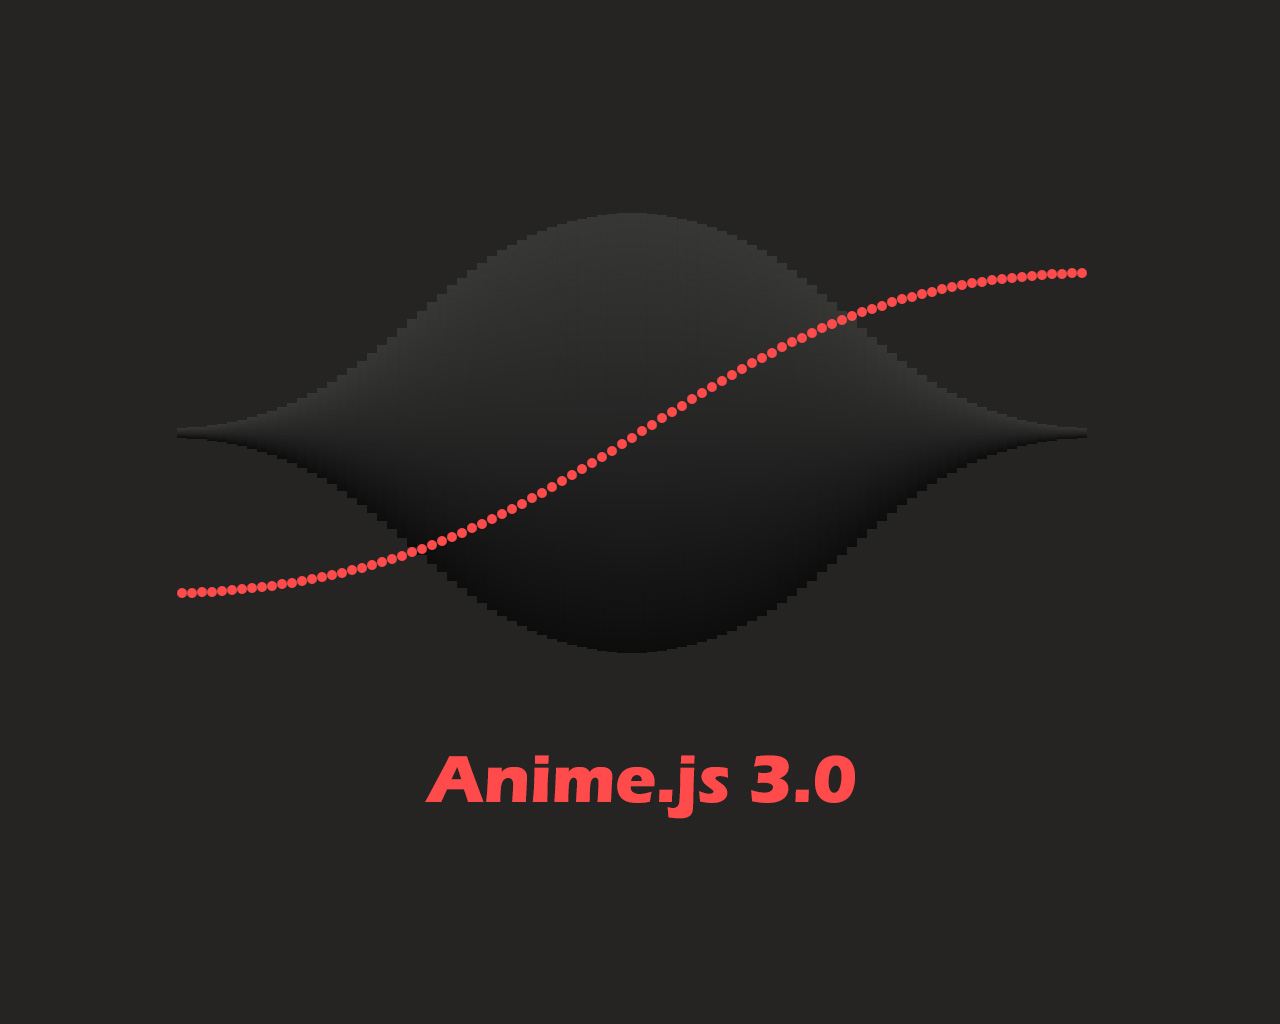 Anime.js 3.0 released